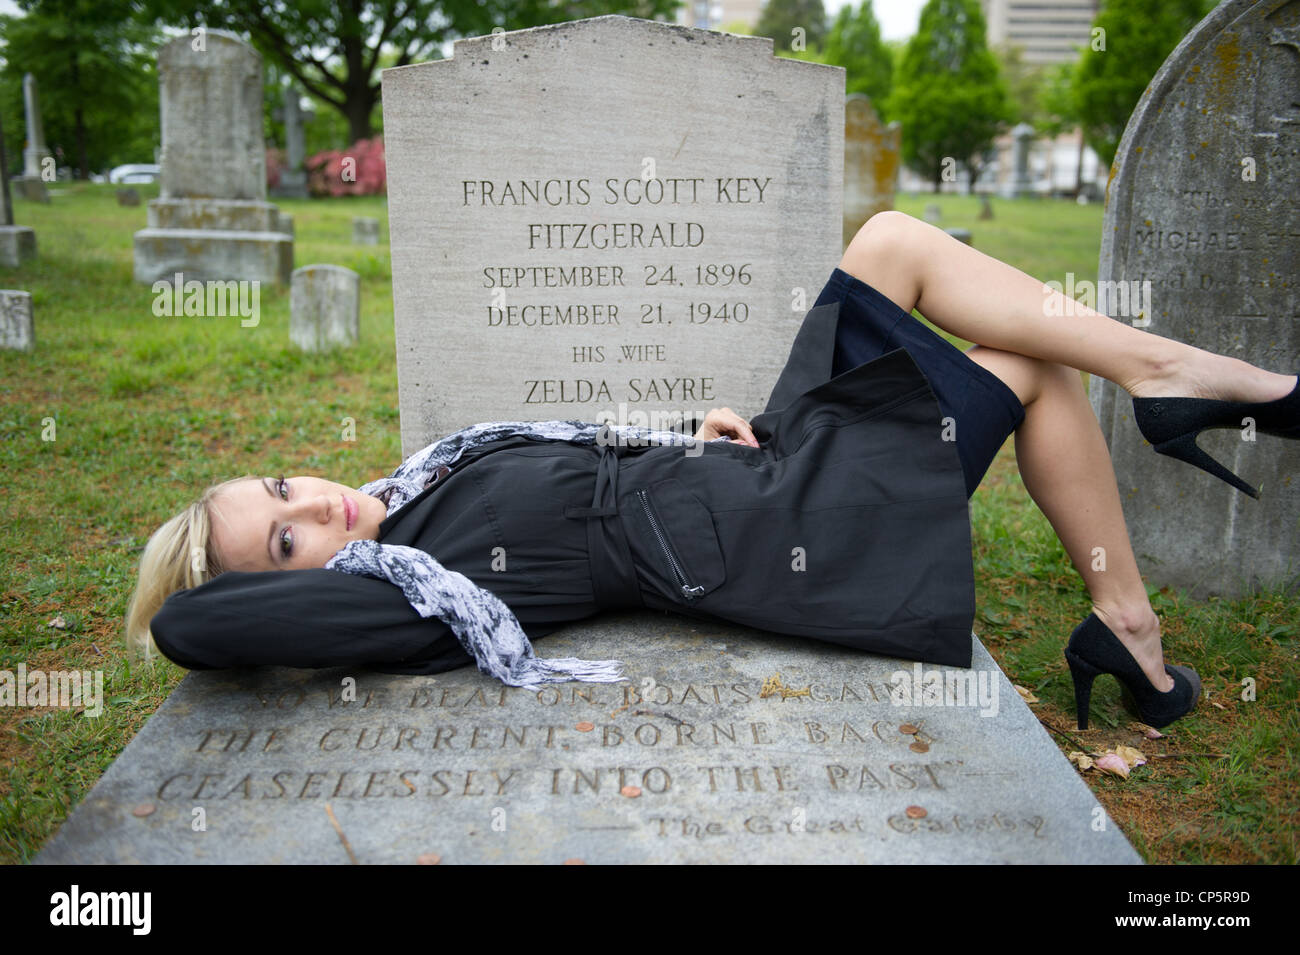 Pushing up the Daisy - Blonde woman at F.Scott Fitzgerald Gravesite with Great Gatsby quote, Rockville Maryland Stock Photo